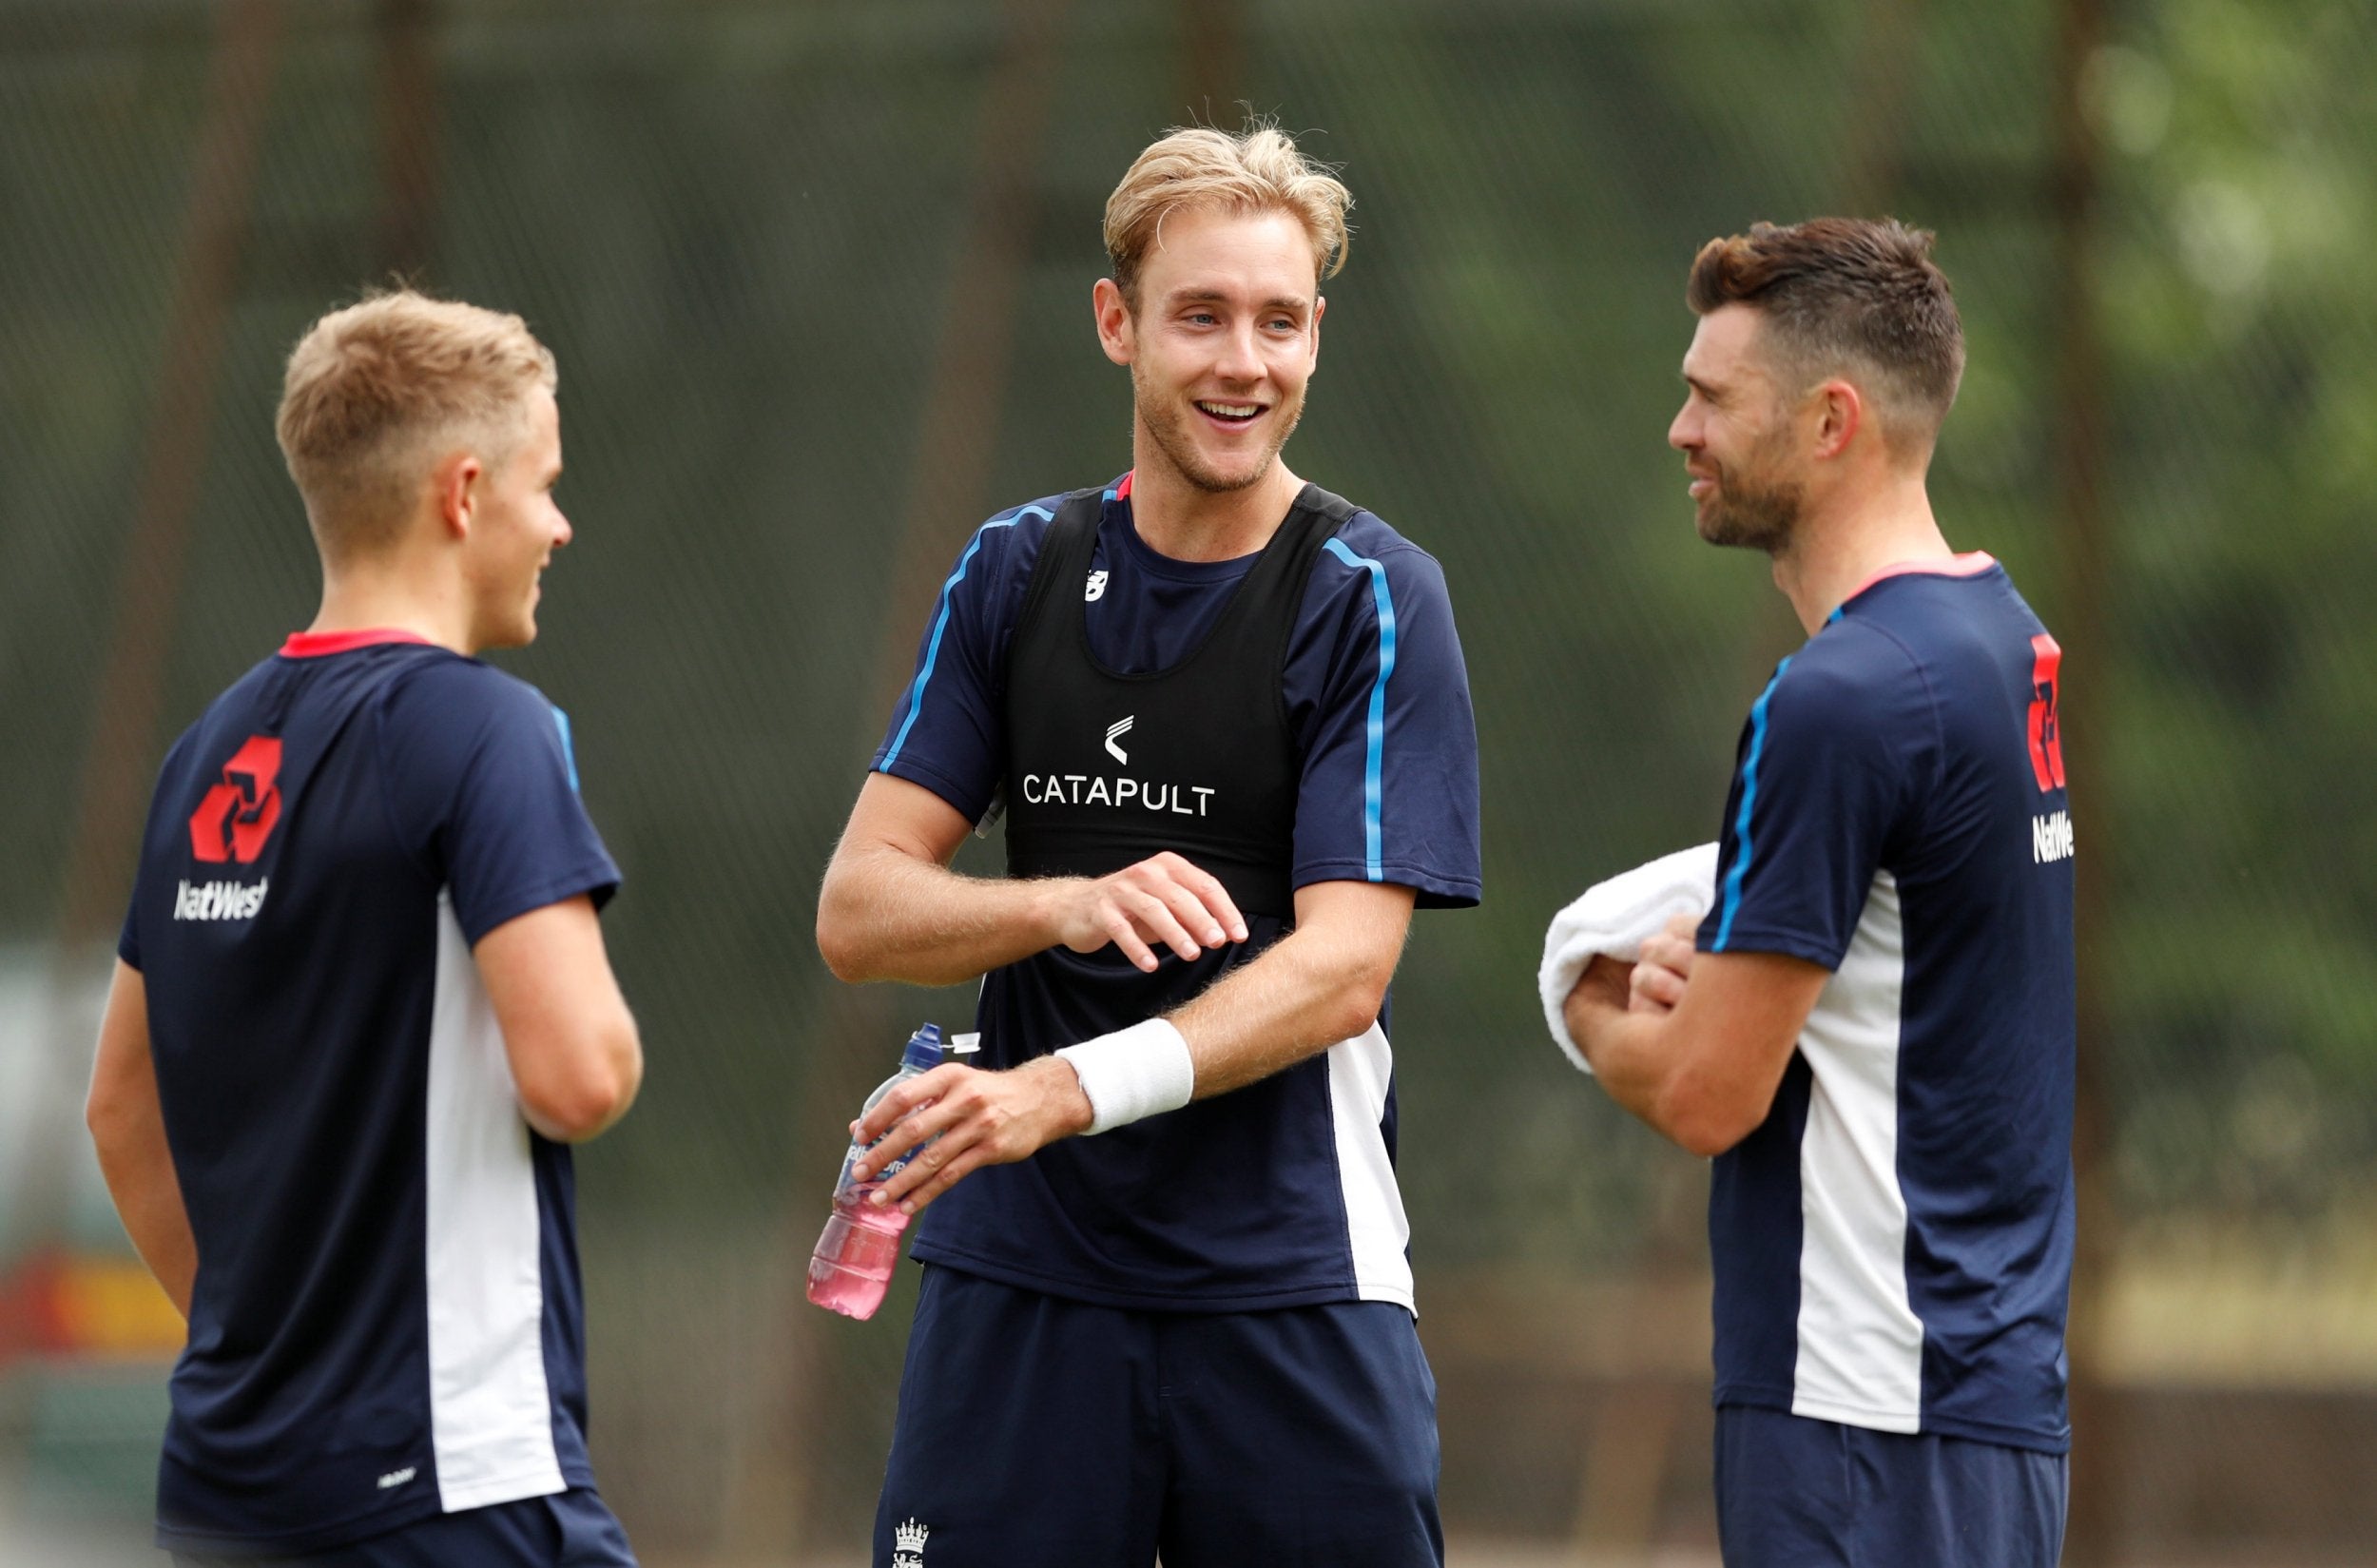 England may be forced into rotation in the bowling department